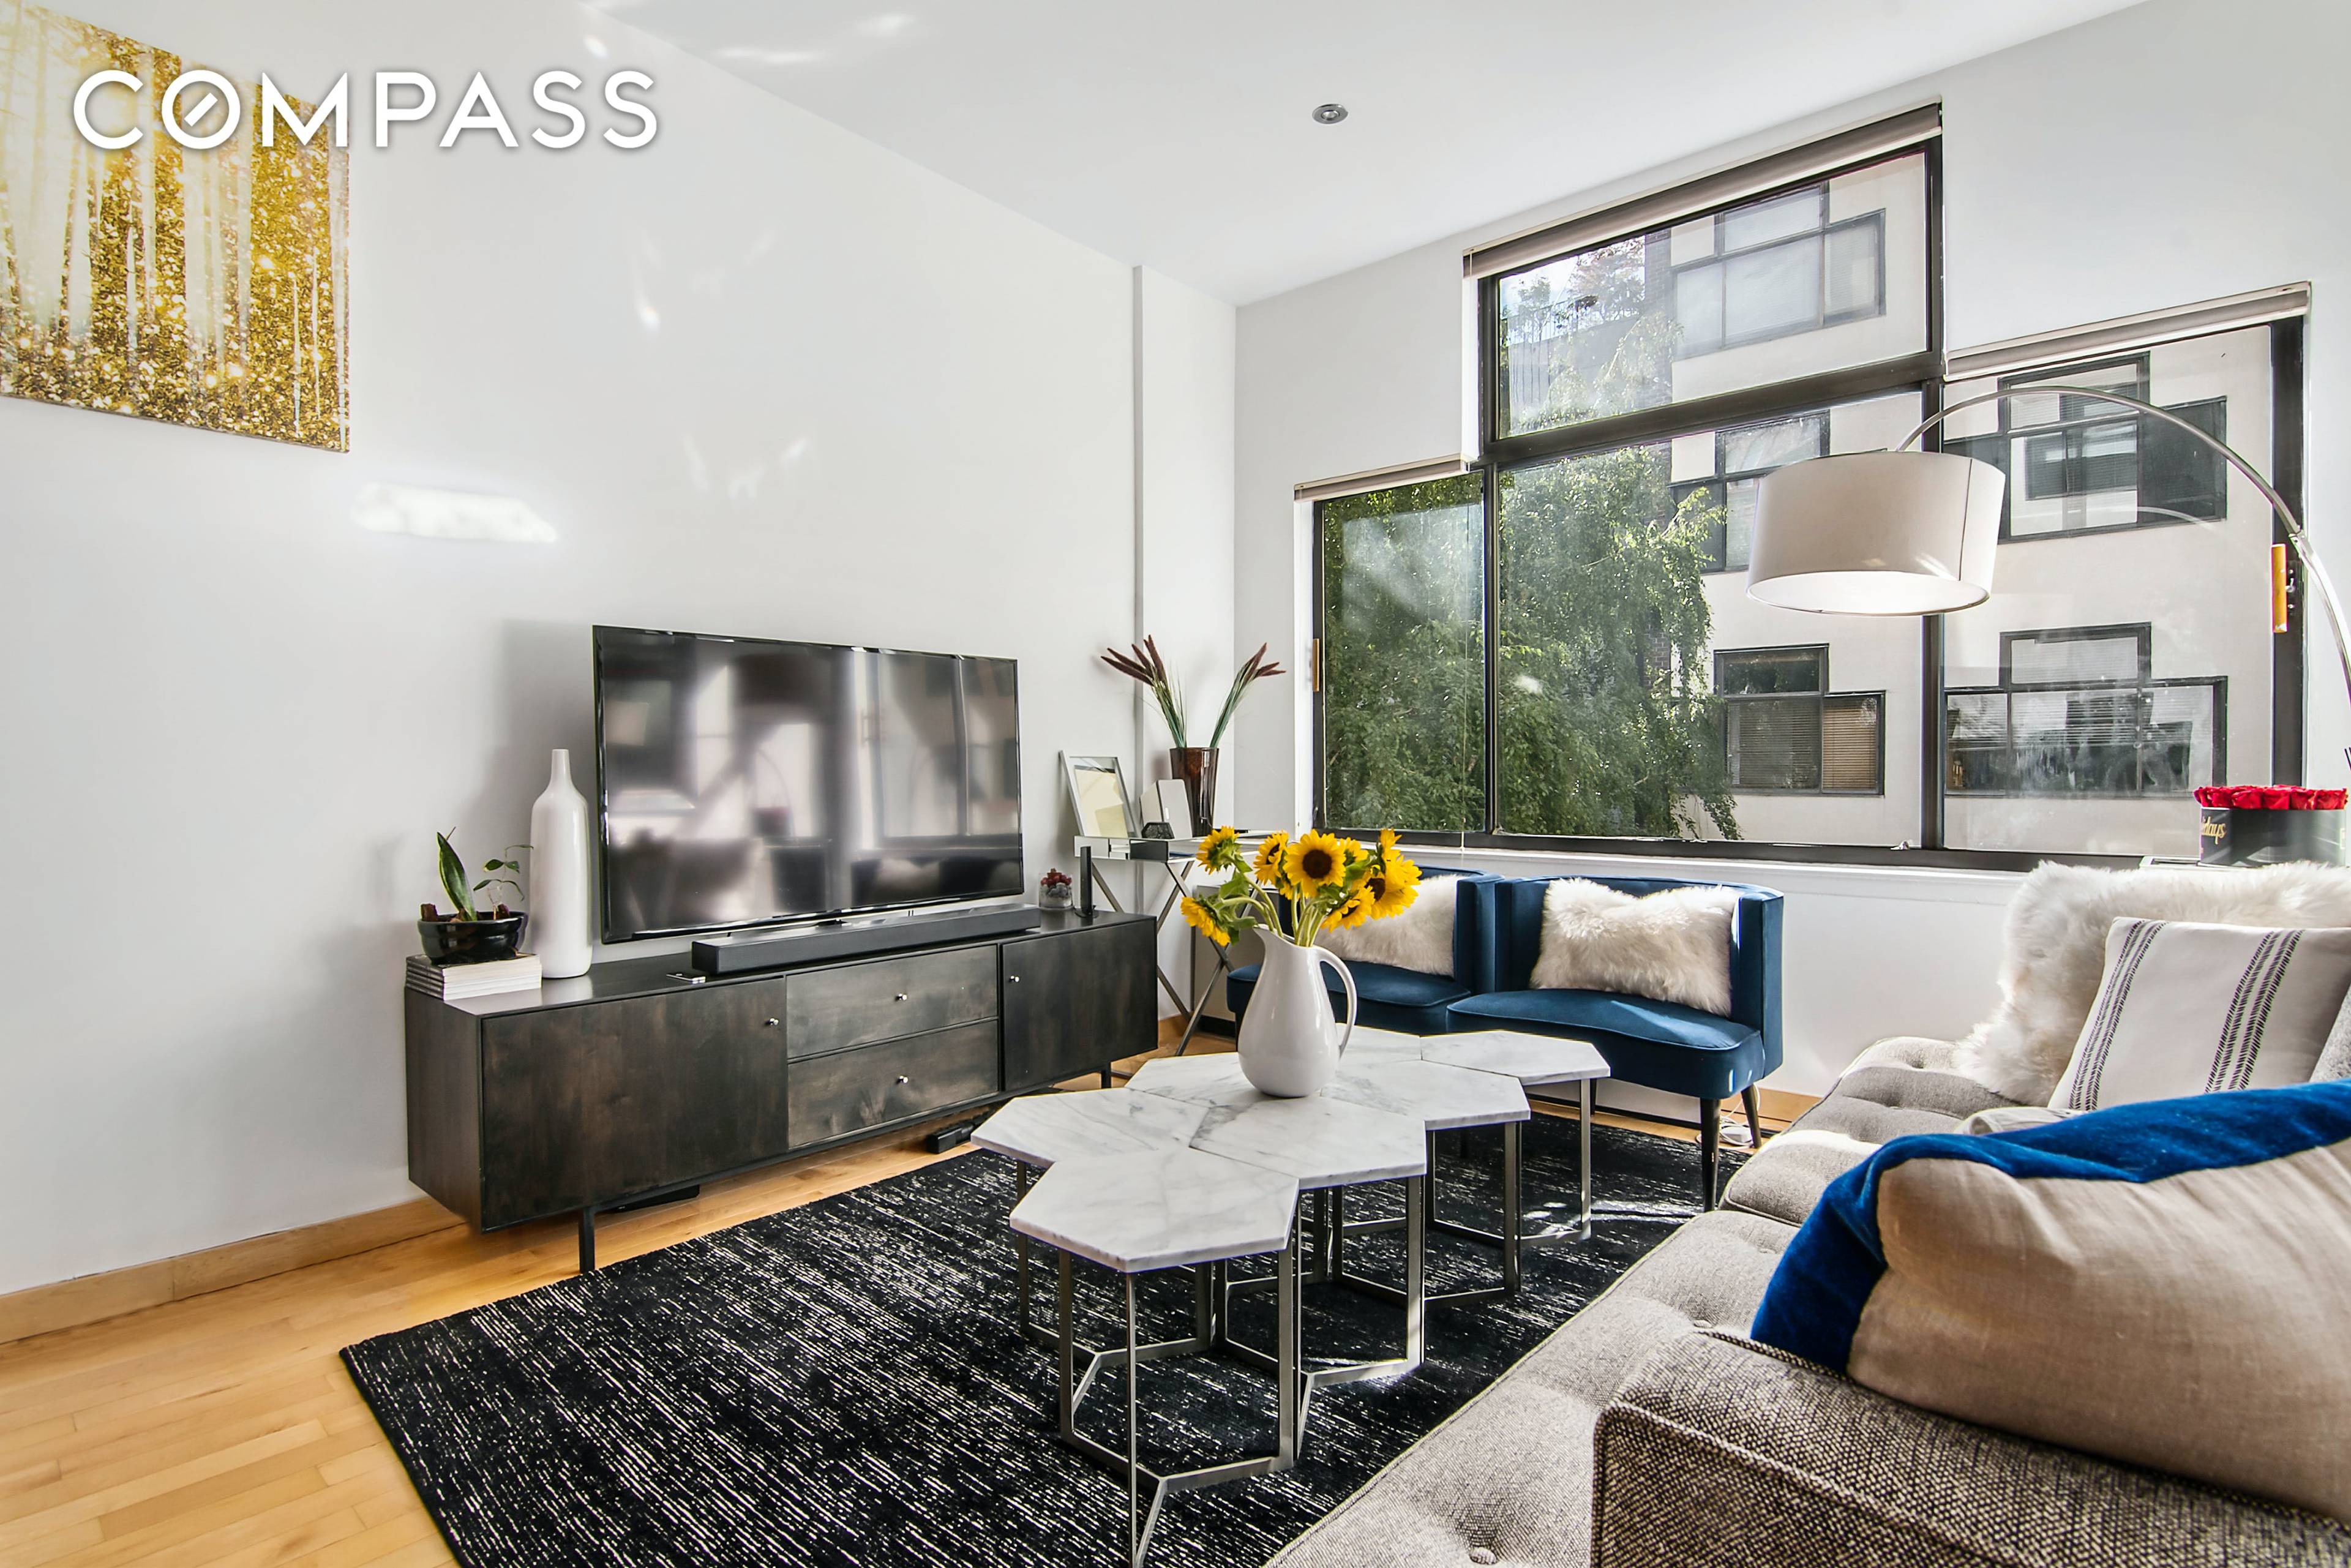 This spacious and sunny one bedroom, one bathroom home is the perfect Downtown sanctuary featuring gorgeous, renovated interiors and expansive living space at a full service cooperative in the heart ...